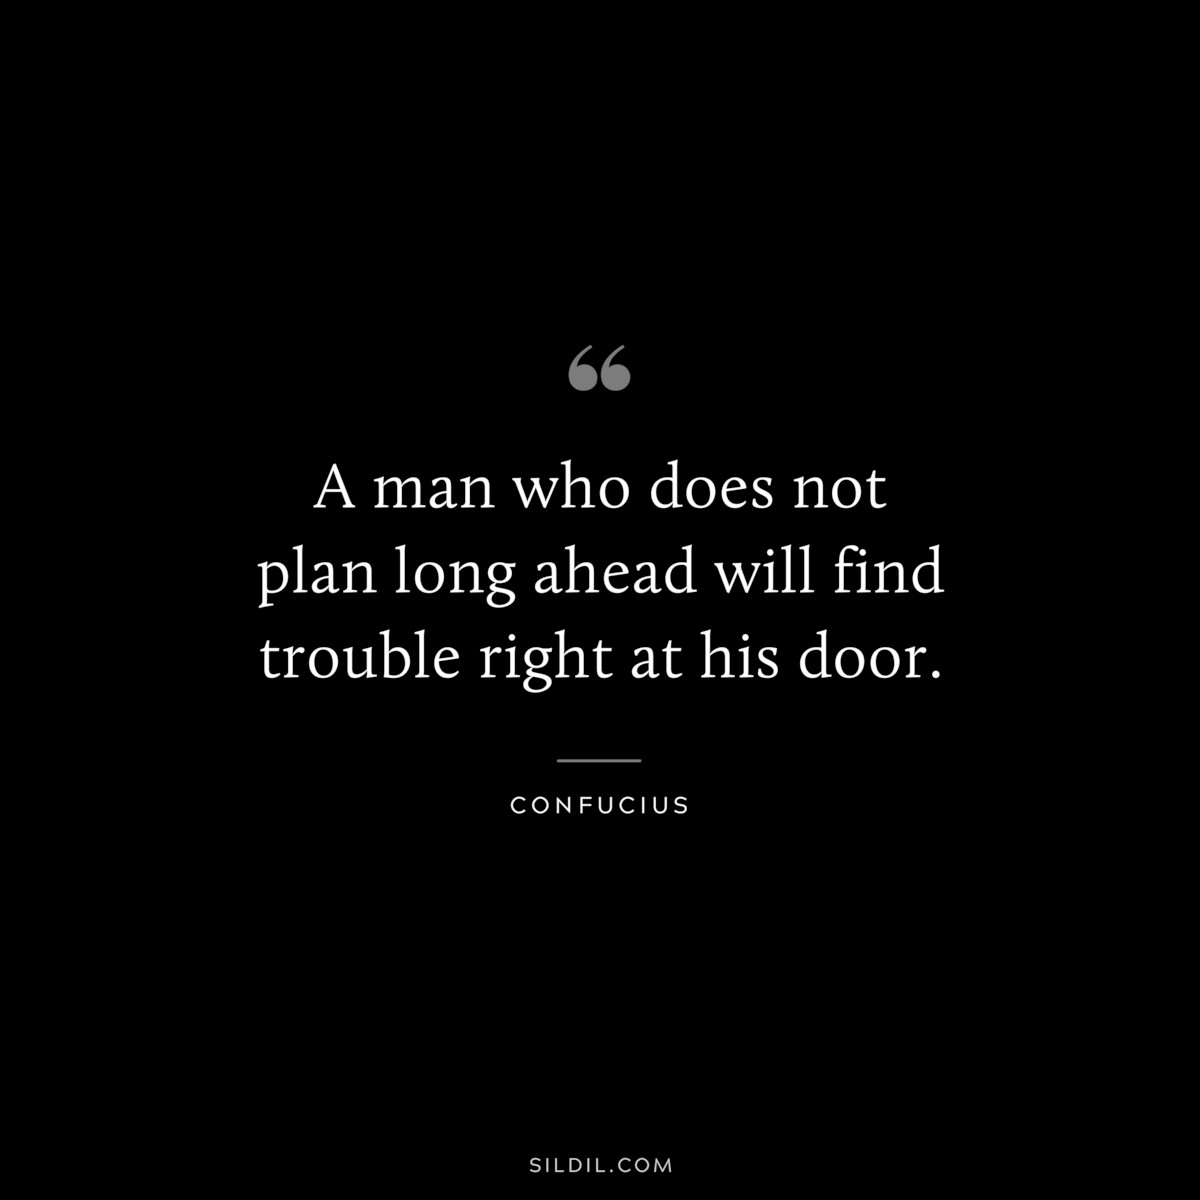 A man who does not plan long ahead will find trouble right at his door. ― Confucius